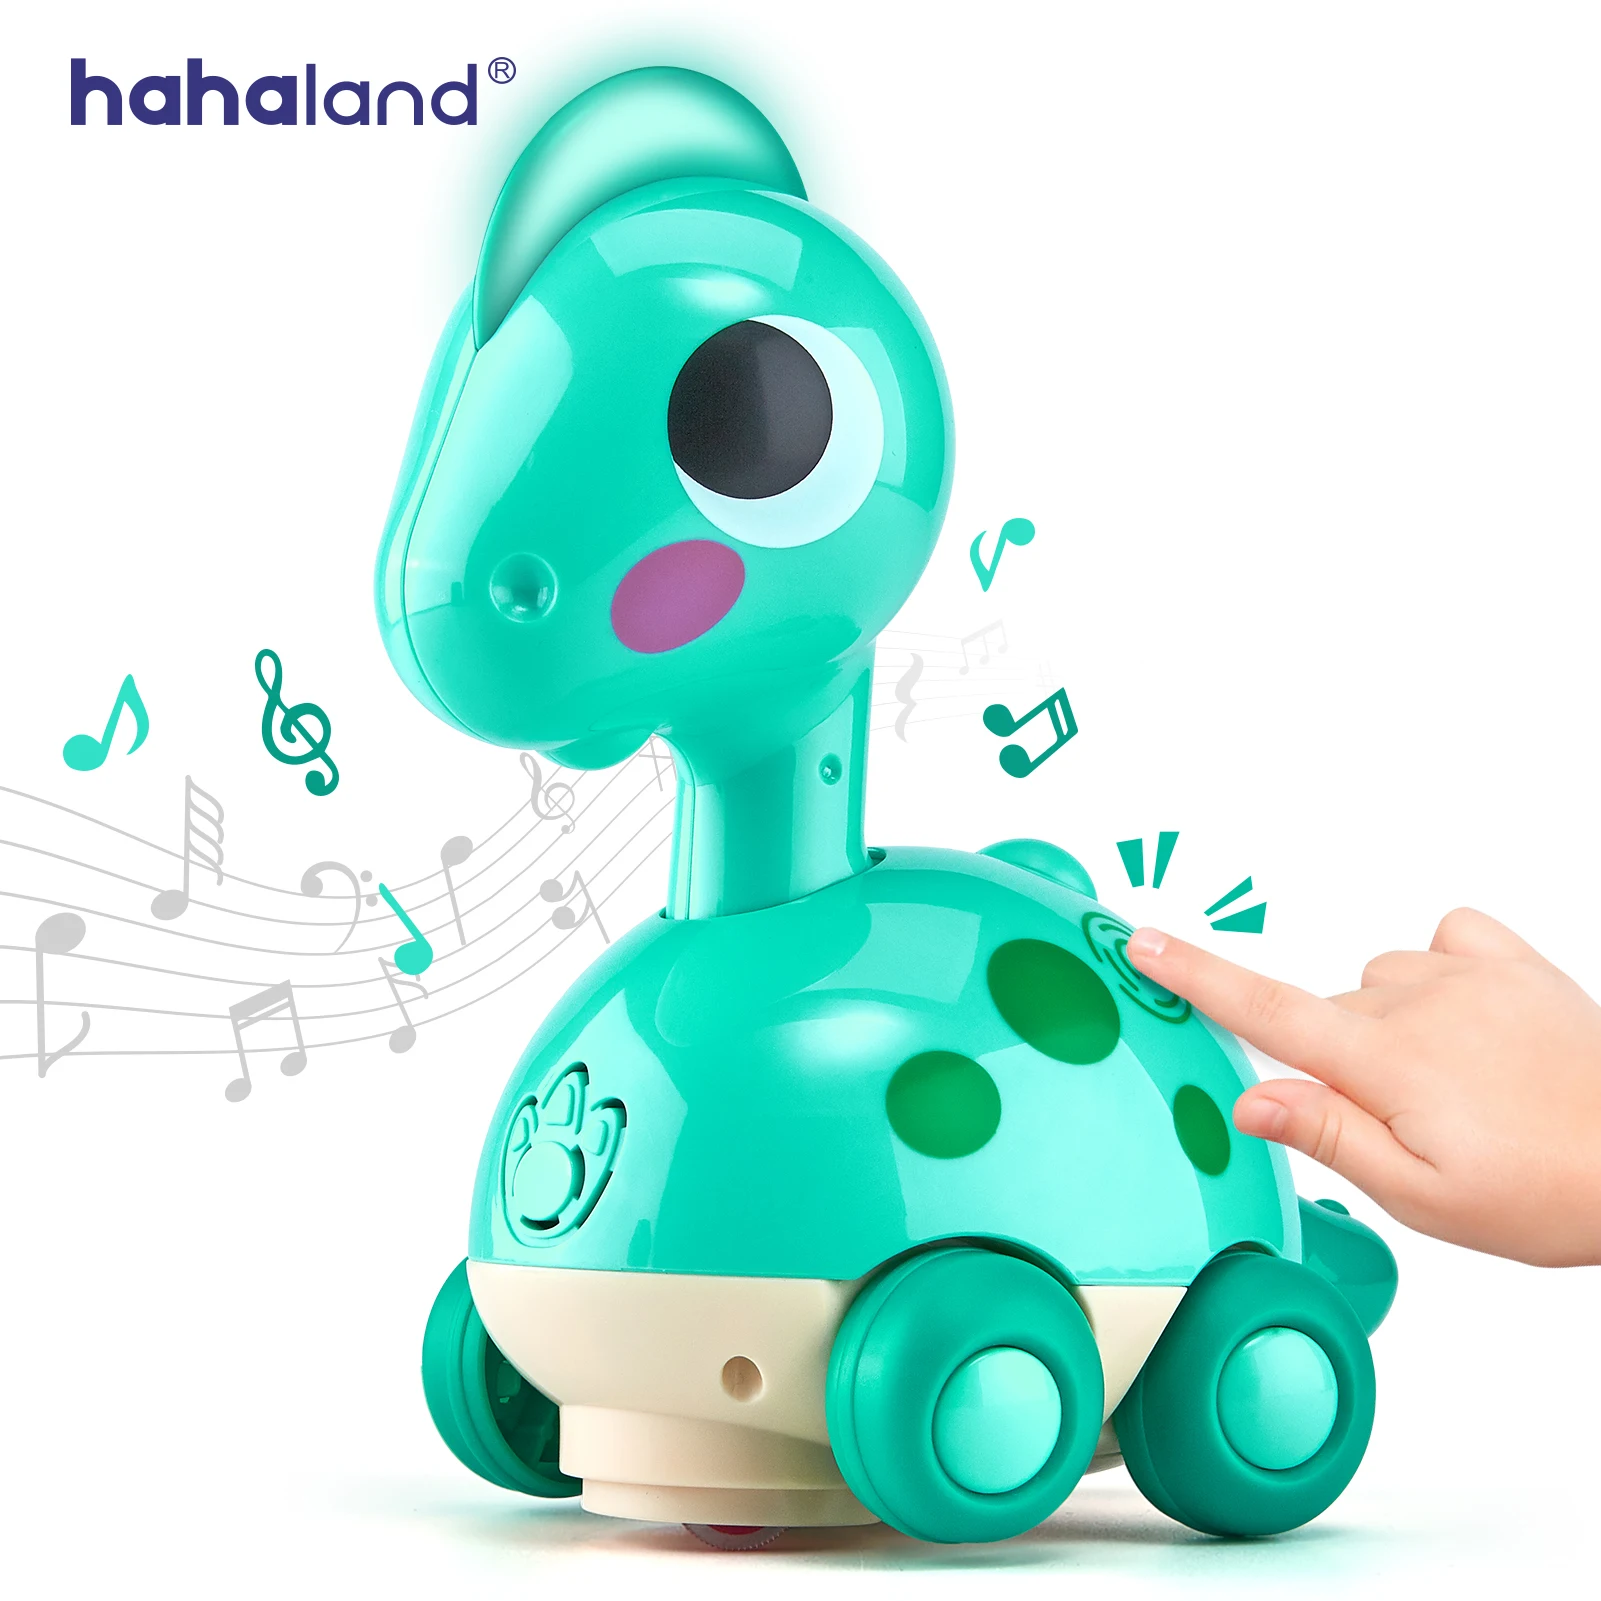 

Hahaland Baby Crawl Toy Touch & Go Musical Light Crawling Dinosaur for 1 Year Old Toddlers Early Education Learn To Climb Toy